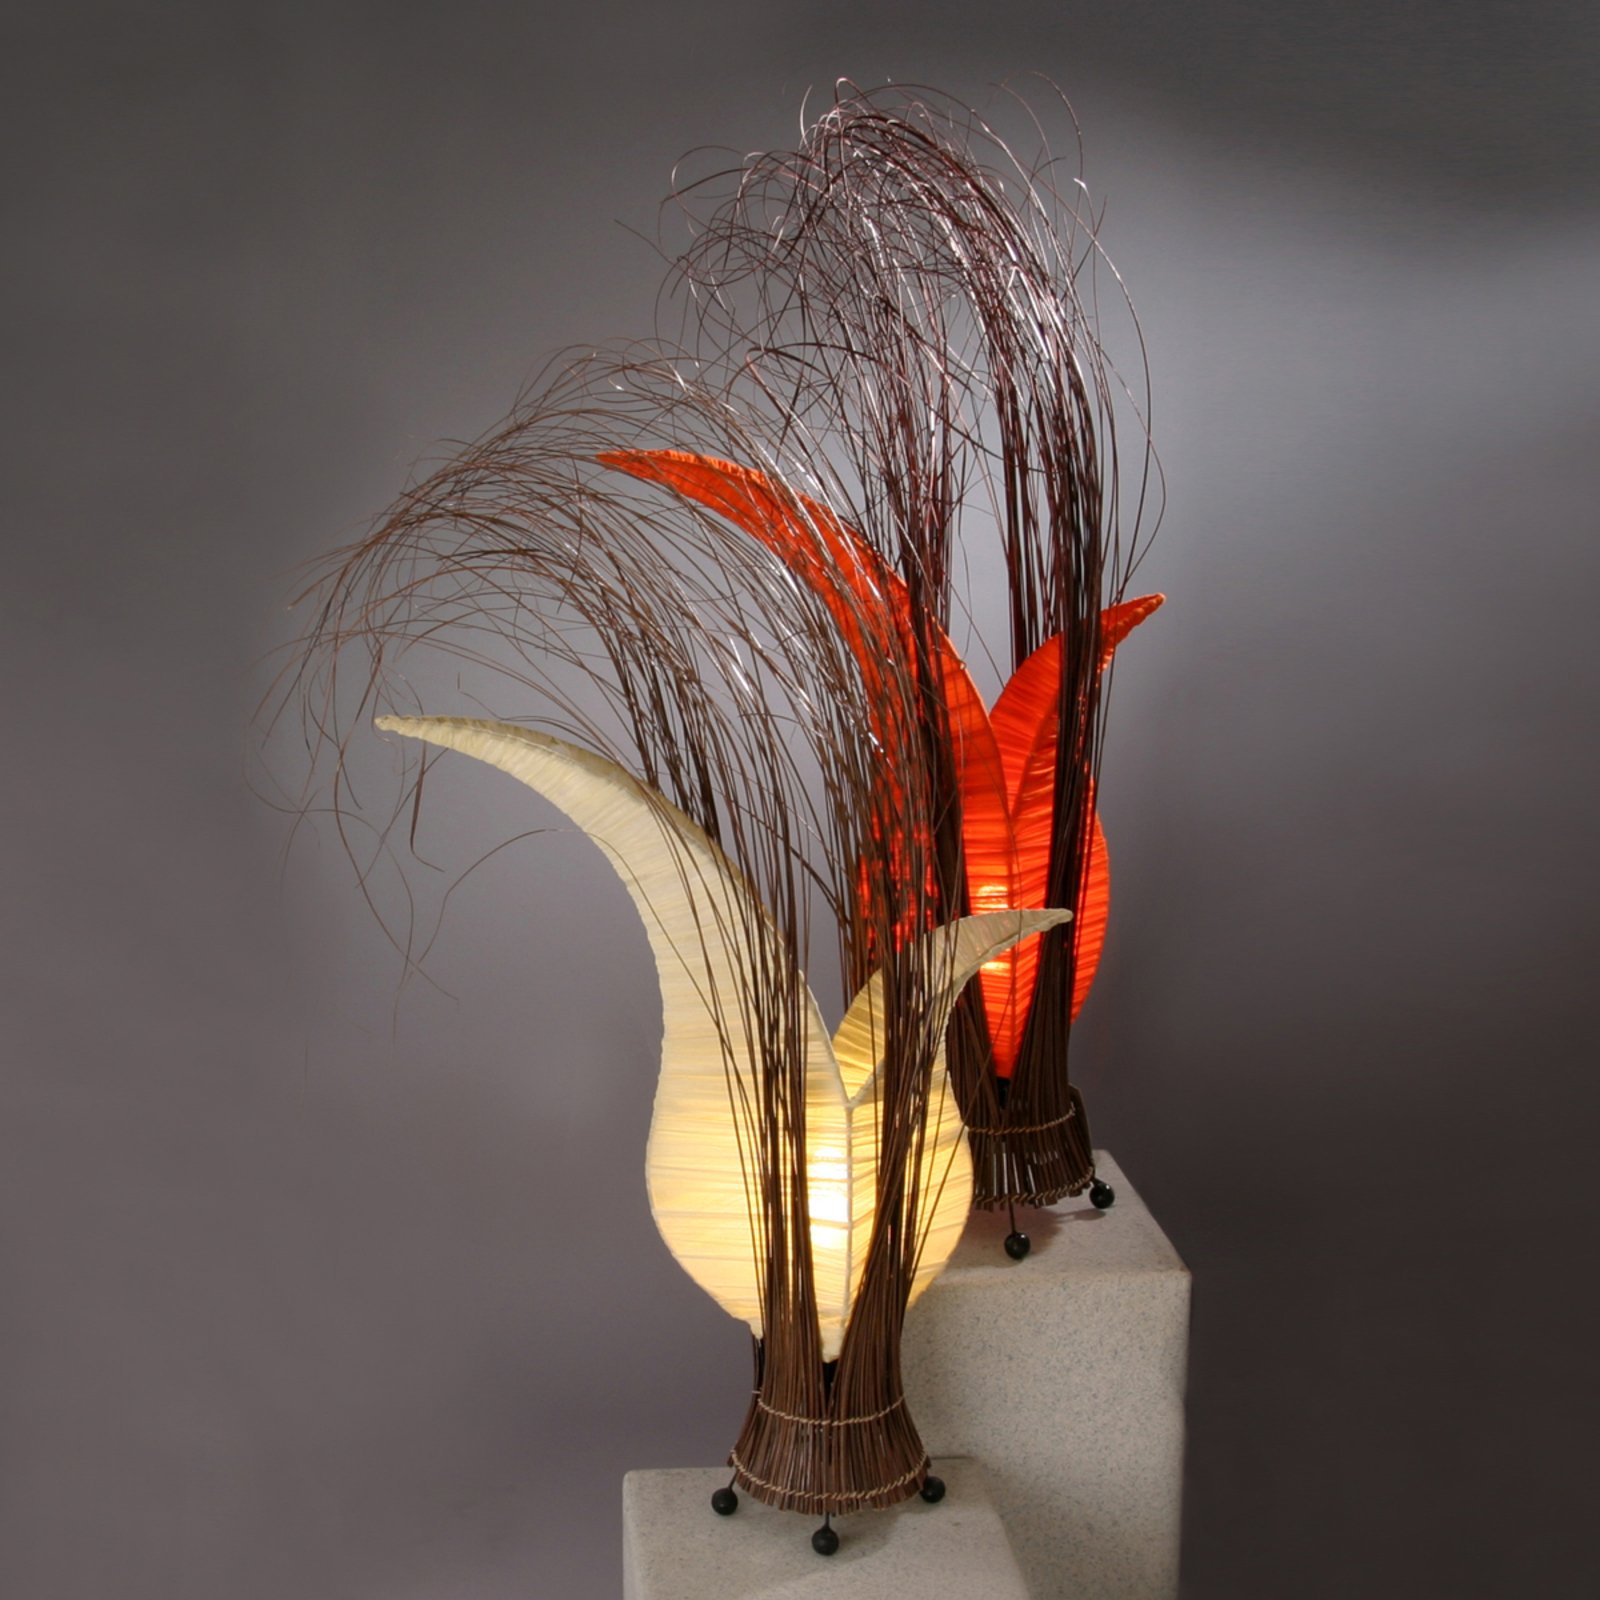 Bunga table lamp with a floral form, orange